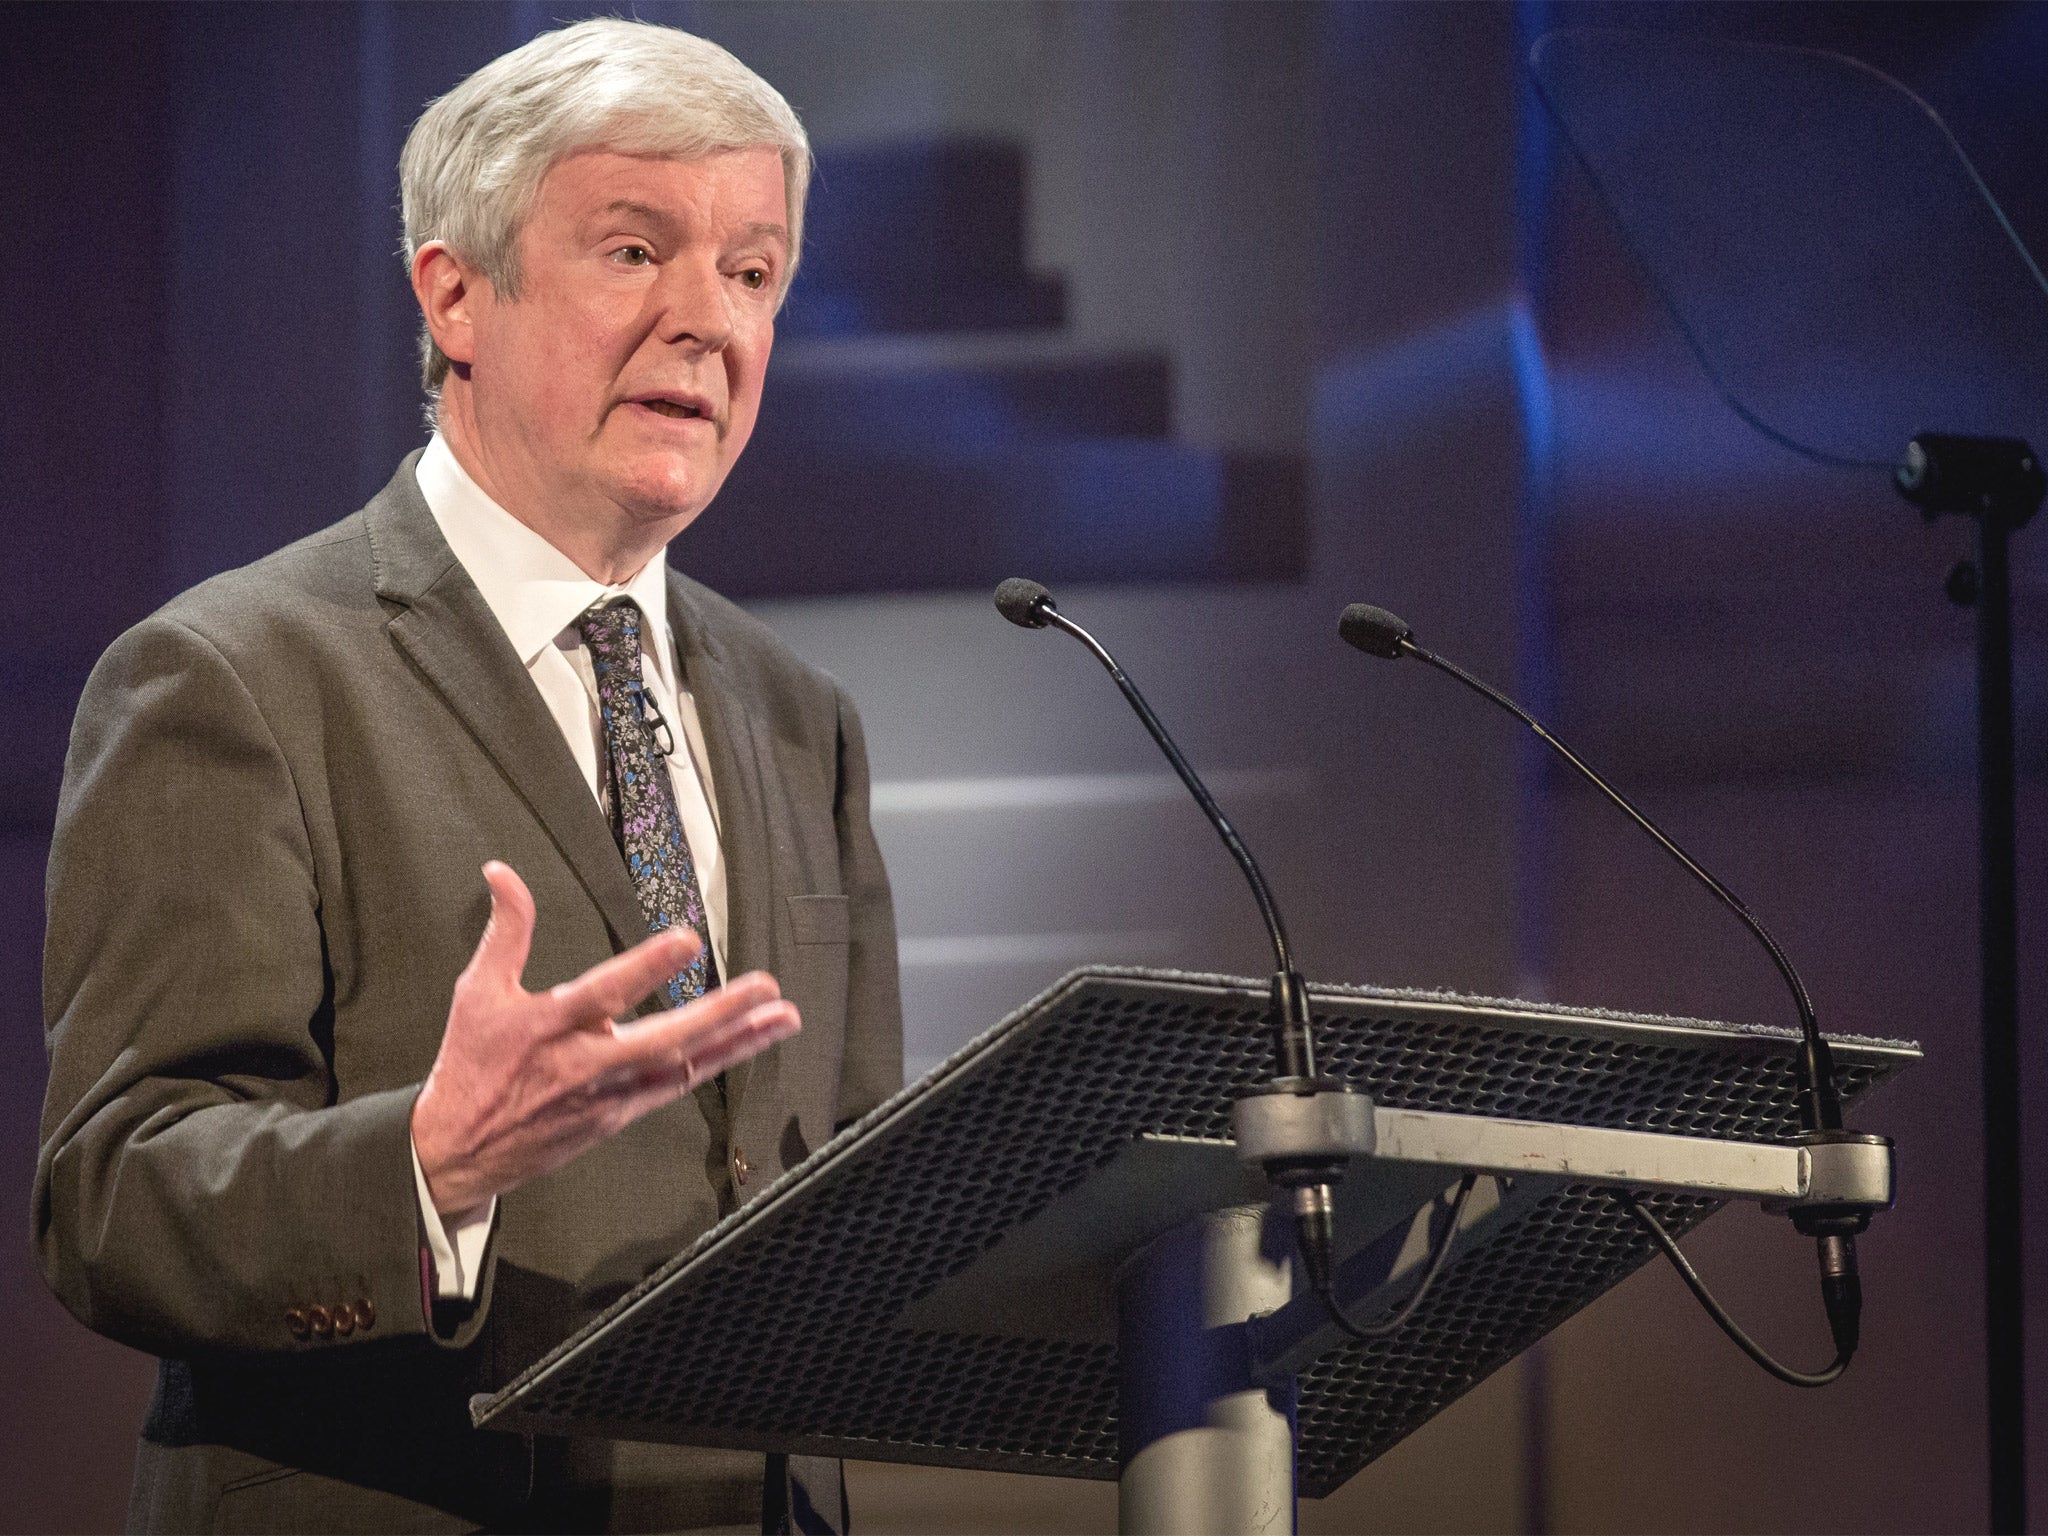 Director General Tony Hall delivers a speech at the Radio Theatre in the BBC’s New Broadcasting House headquarters